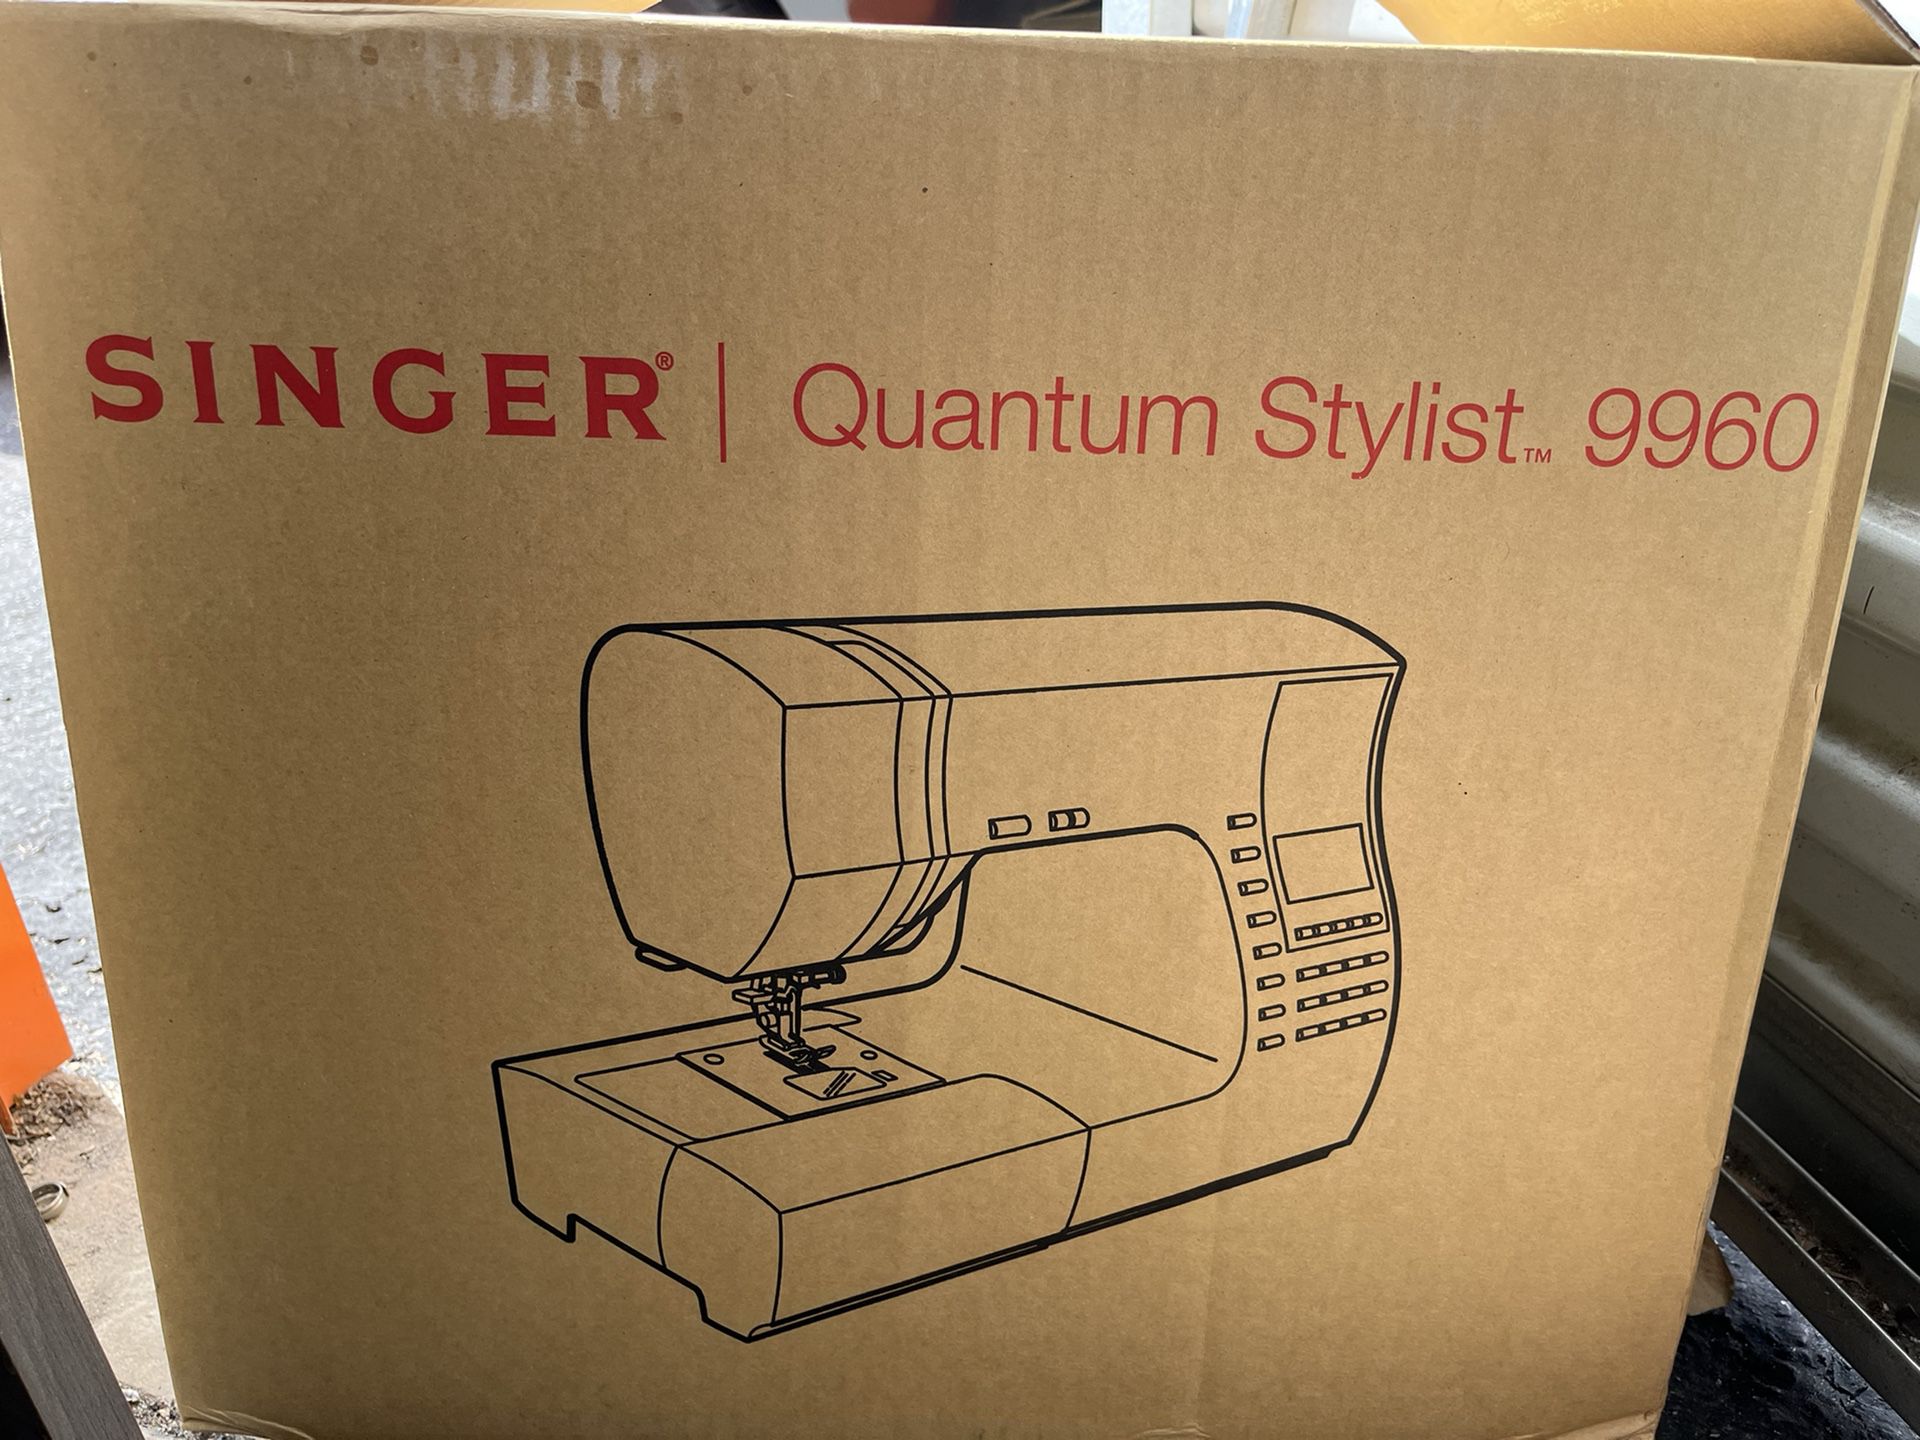 Singer Quantum Stylist 9960 - Basics and Overview 